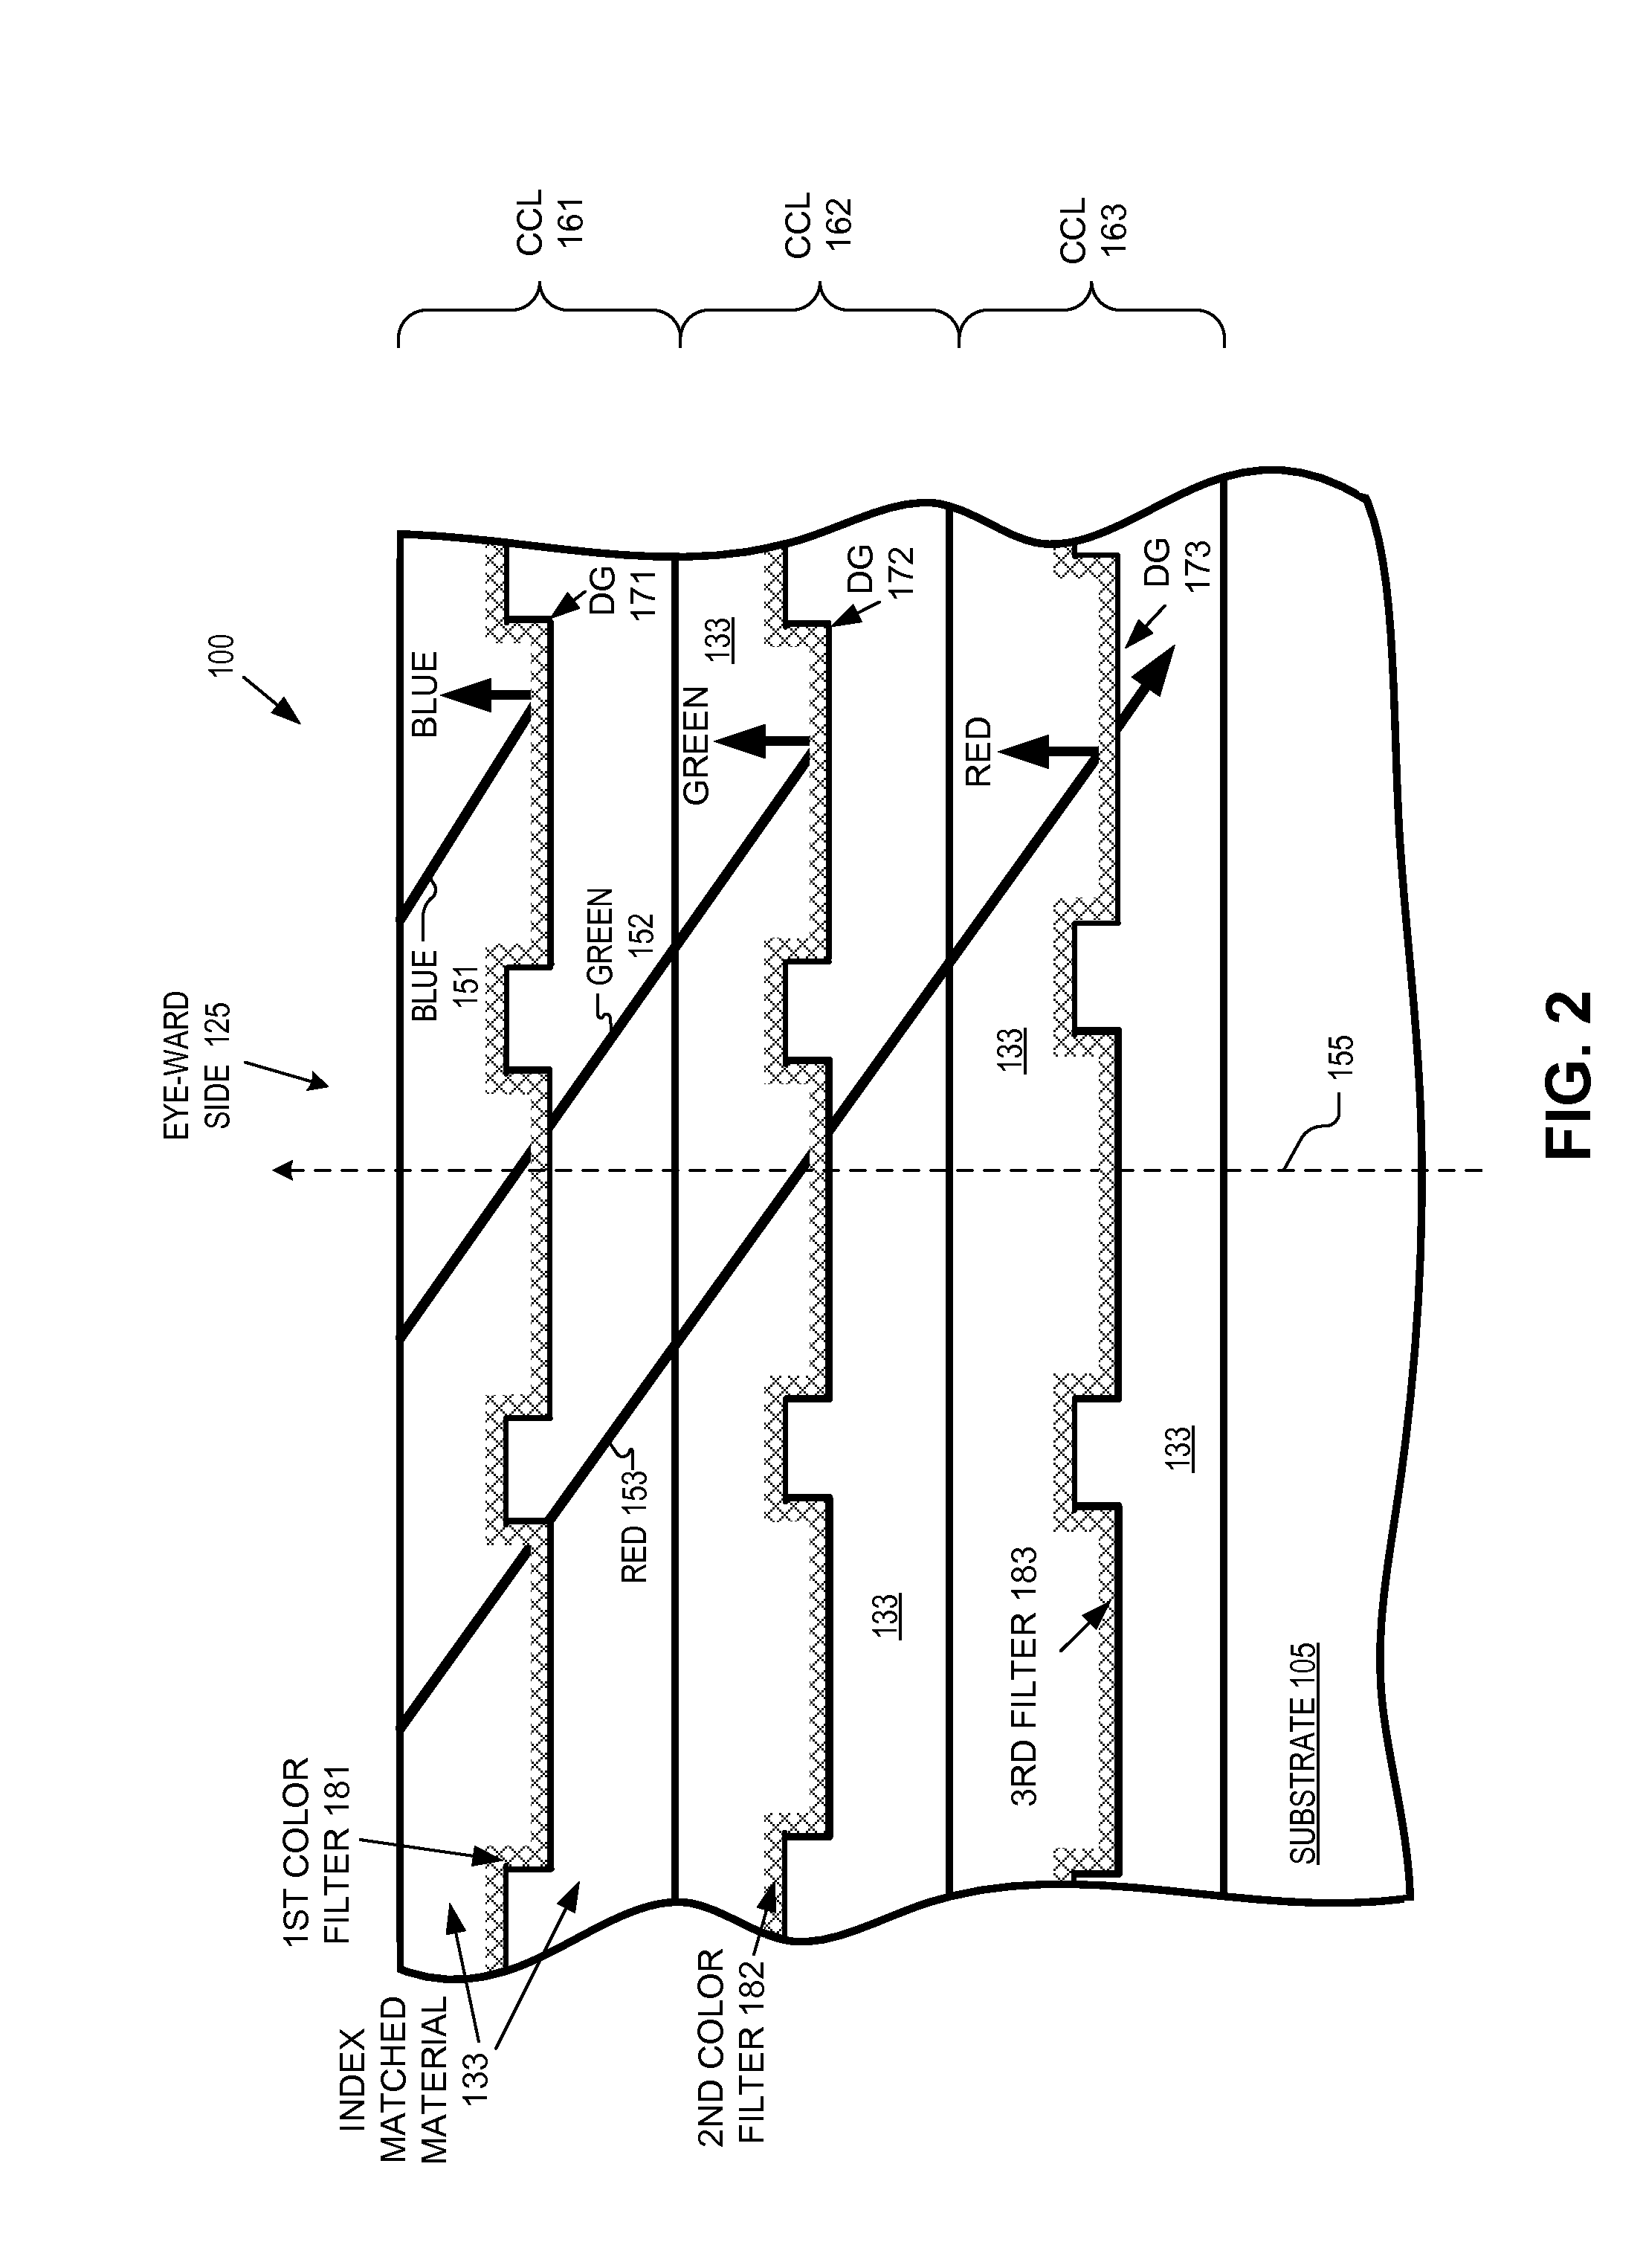 Optical combiner for near-eye display